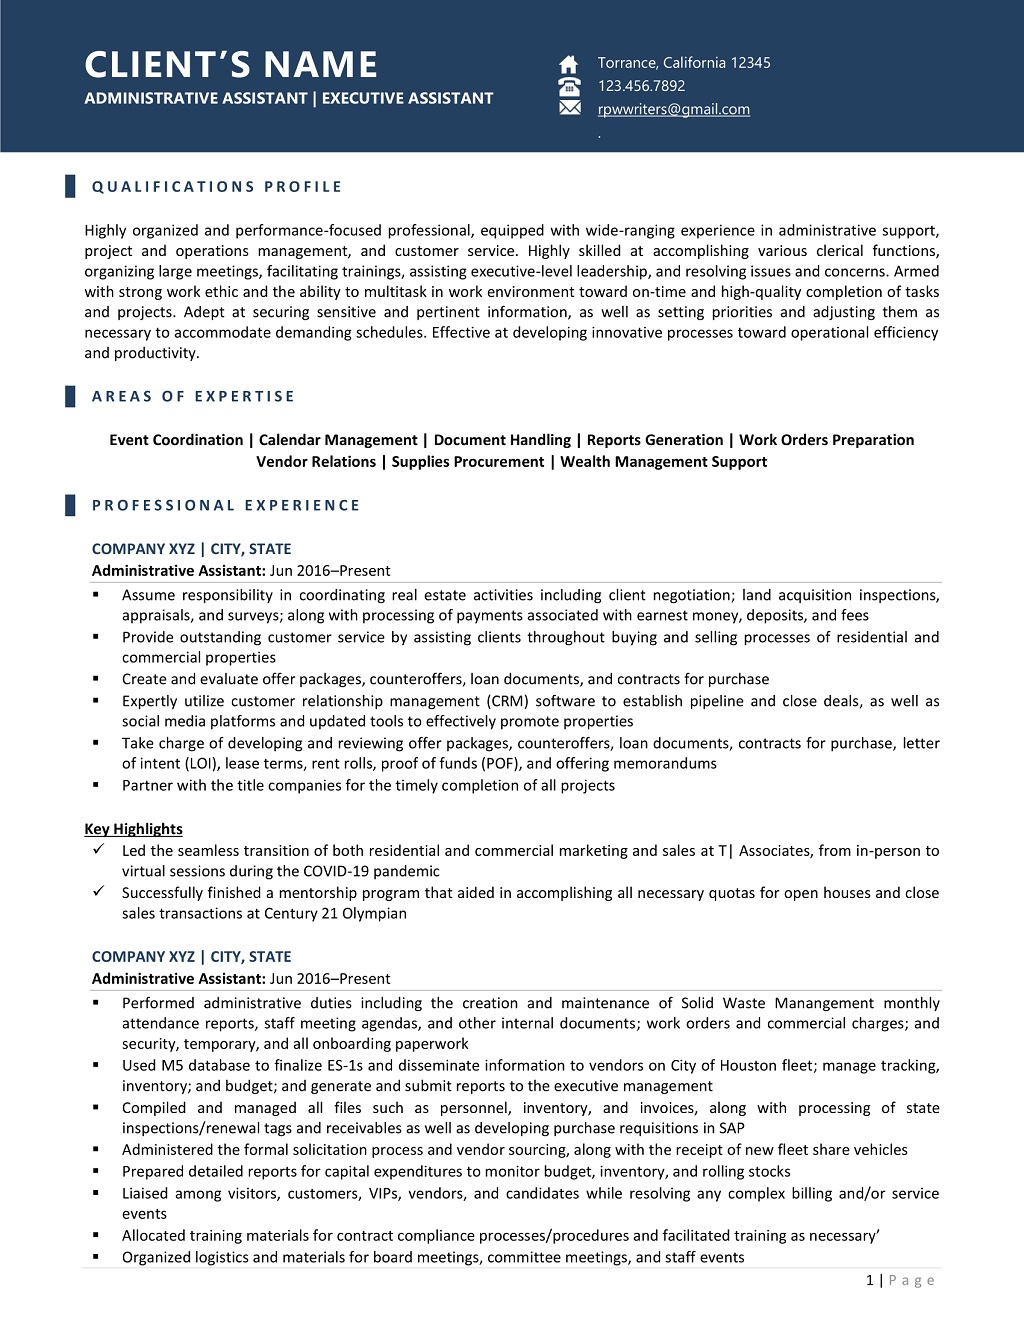 Administrative Assistant Resume Page One